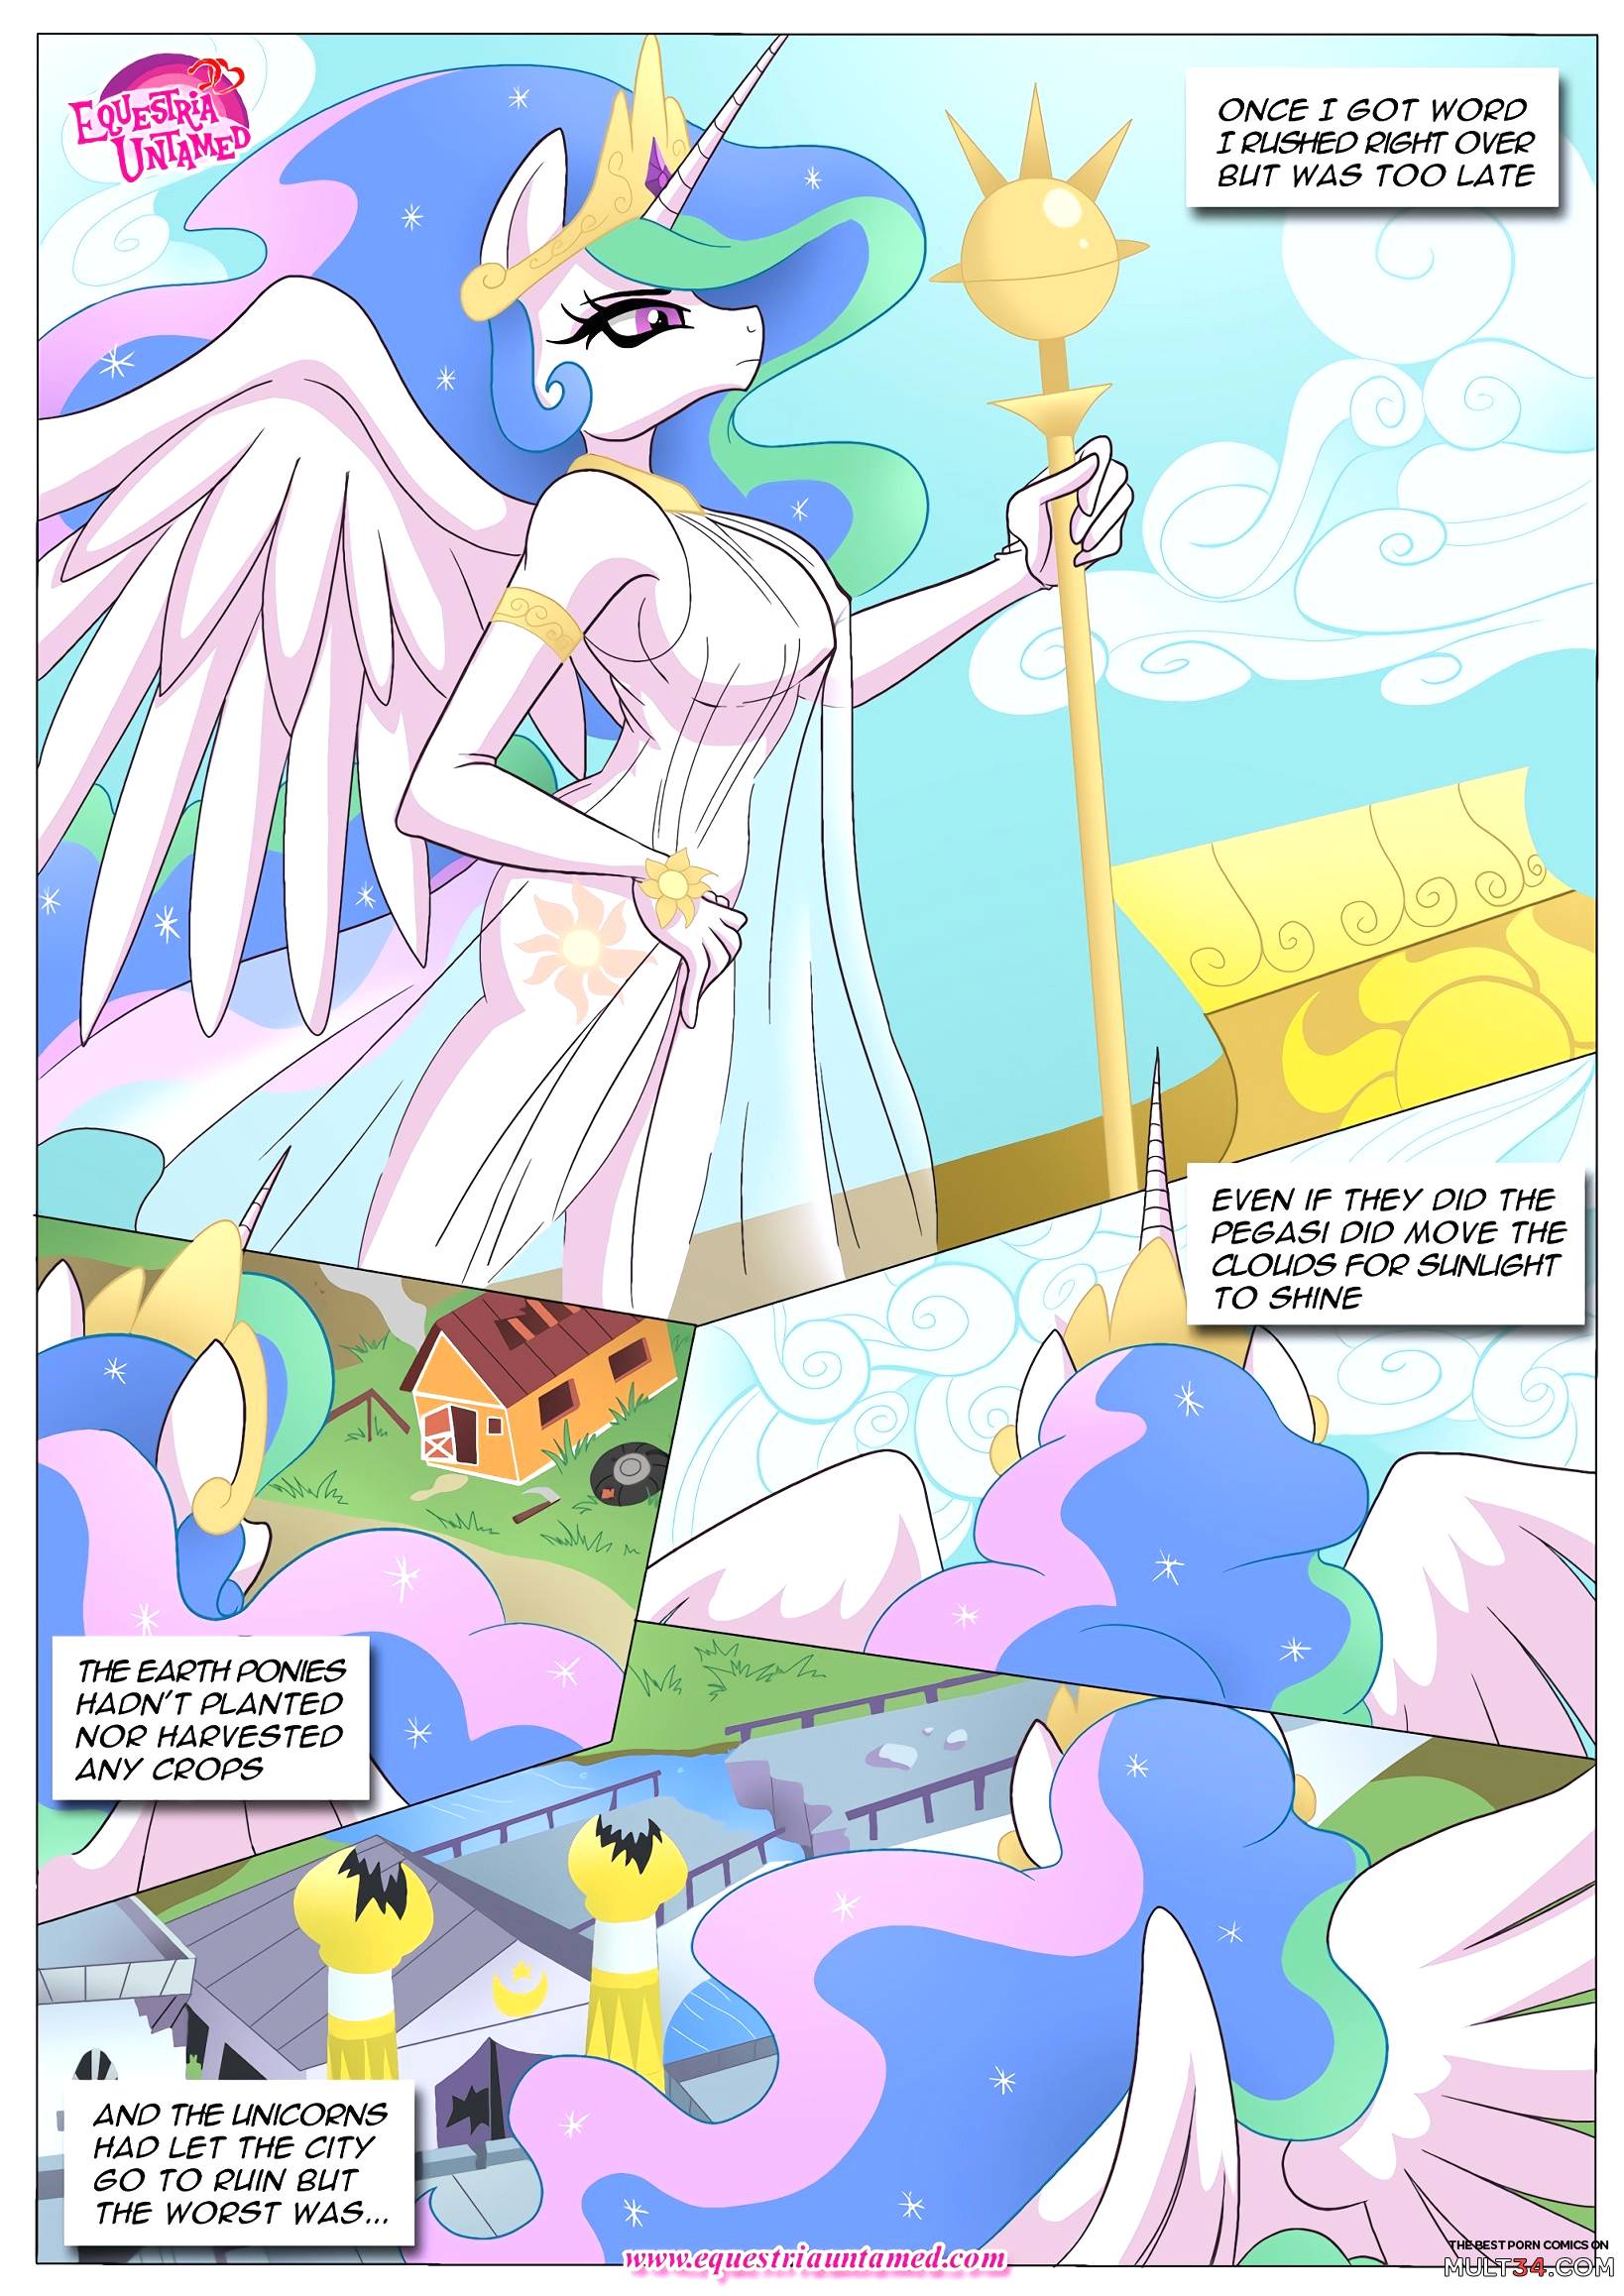 Power of Dragon Mating - Chapter 1 page 14